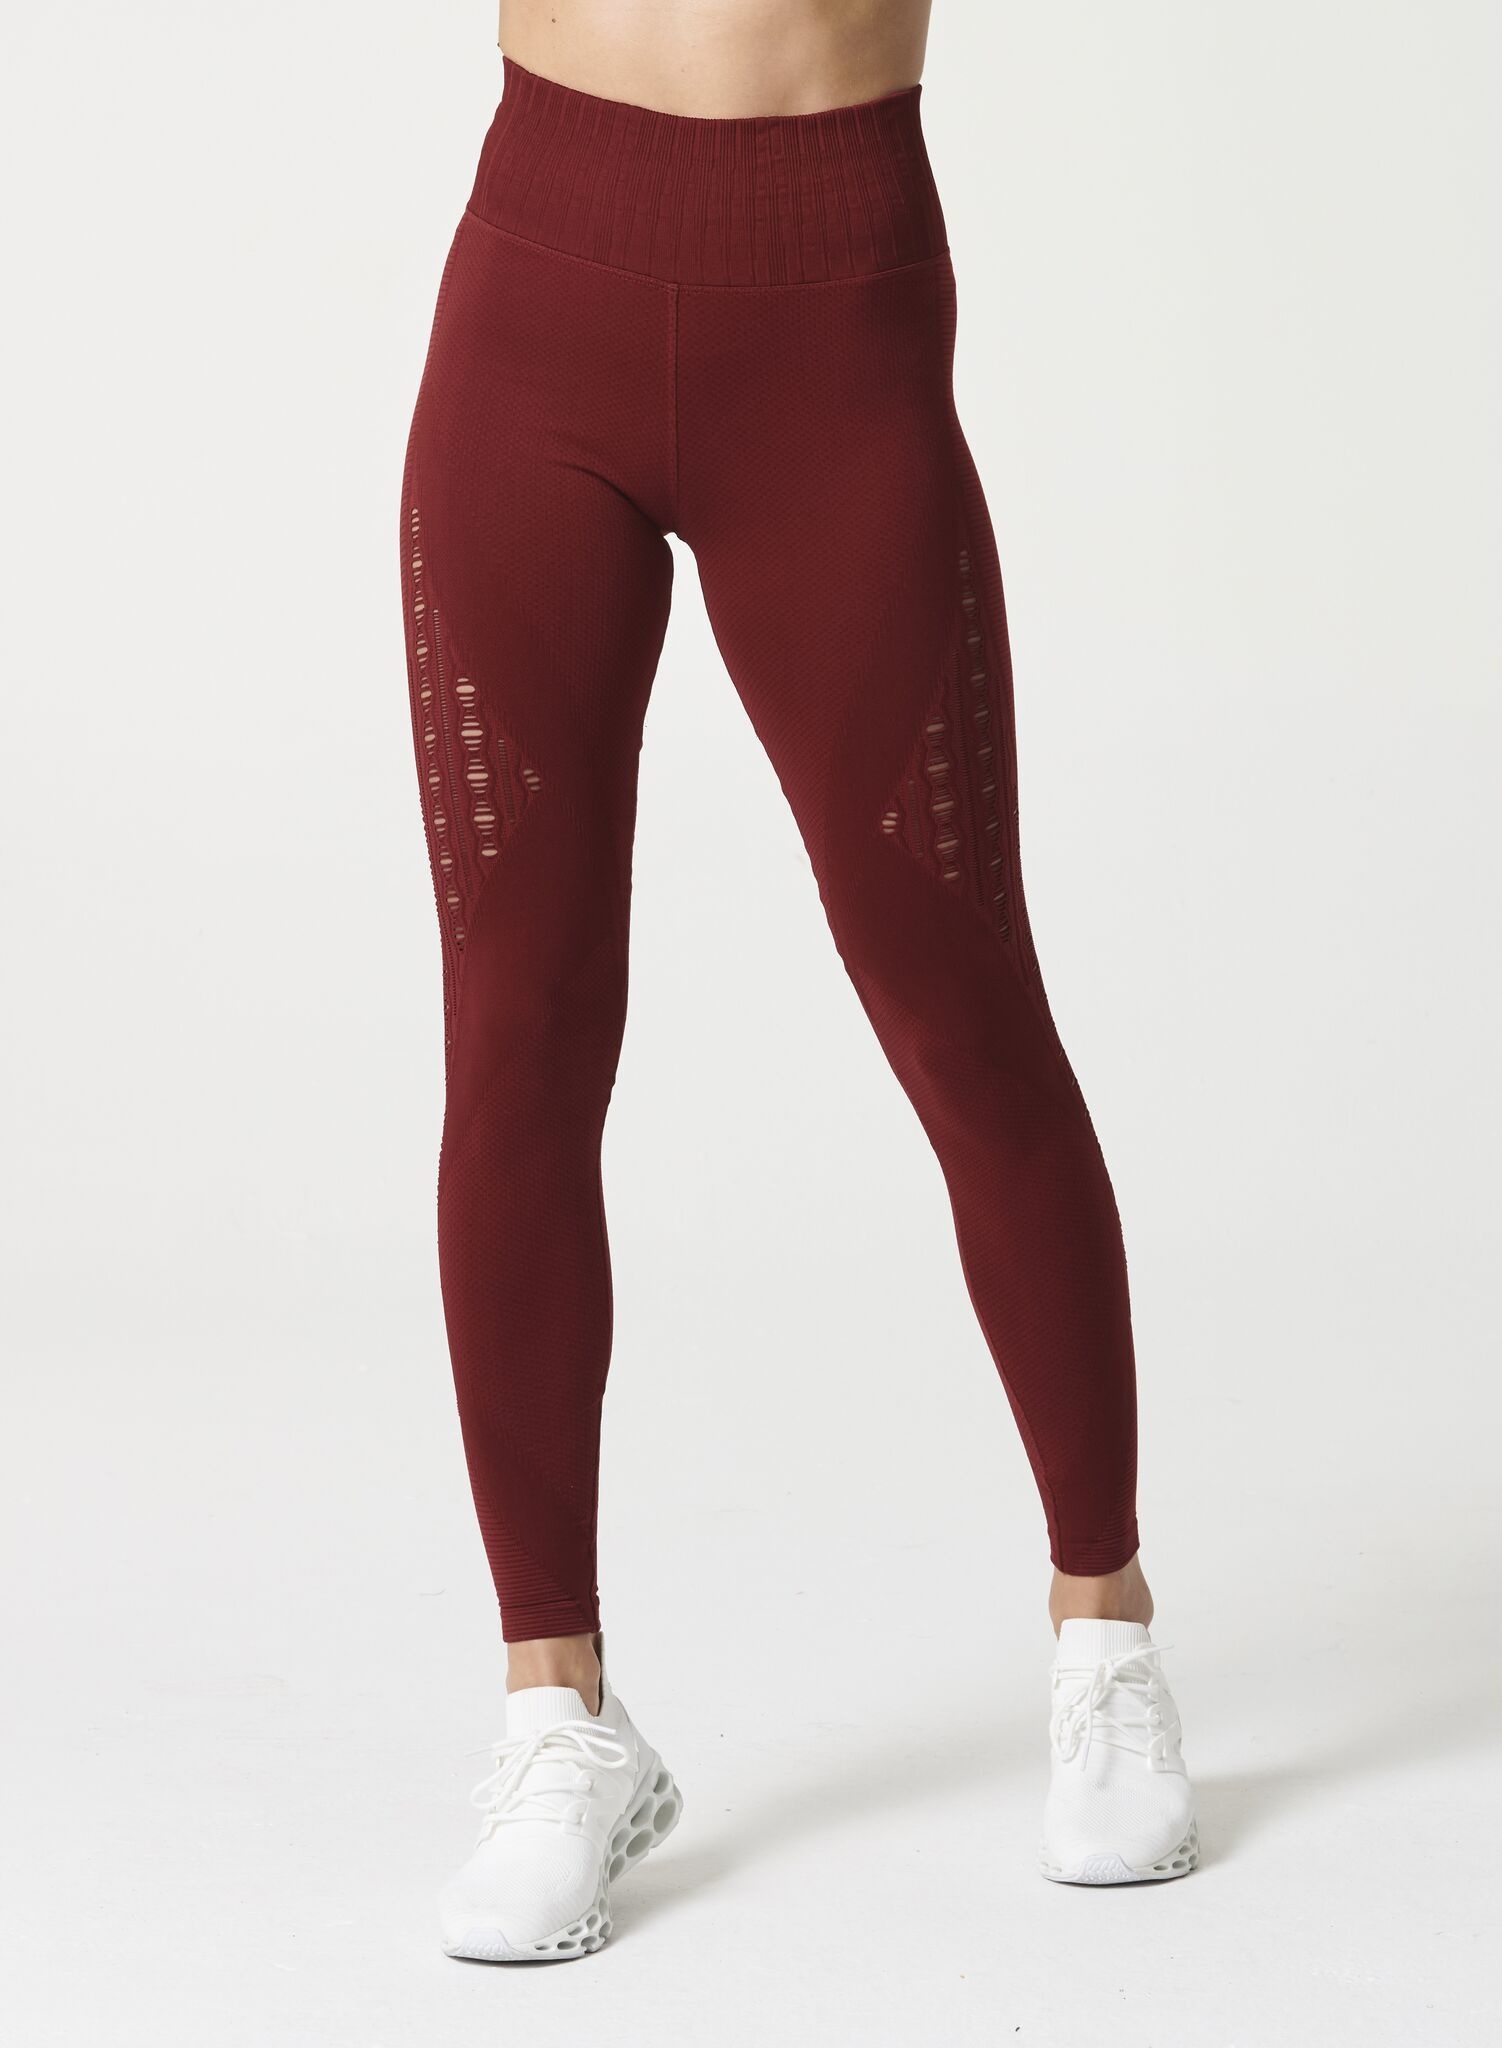 Red gymshark energy seamless leggings! No size tag